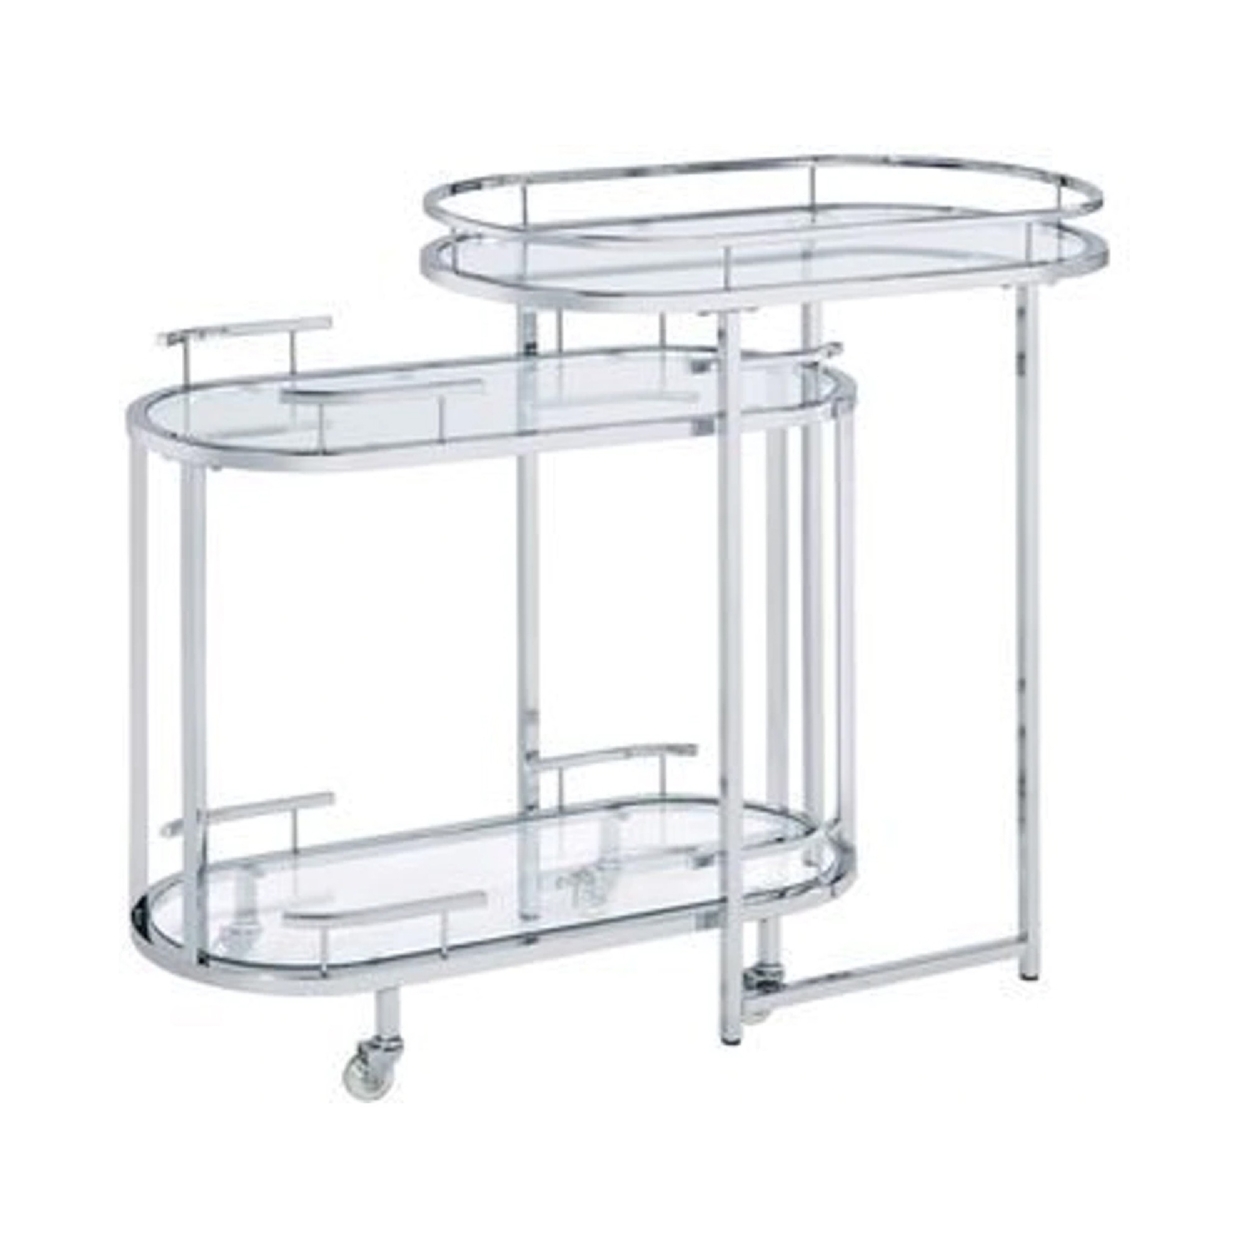 16 Inch Curved 2 Tier Serving Bar Cart With Tempered Glass Shelves, Silver- Saltoro Sherpi